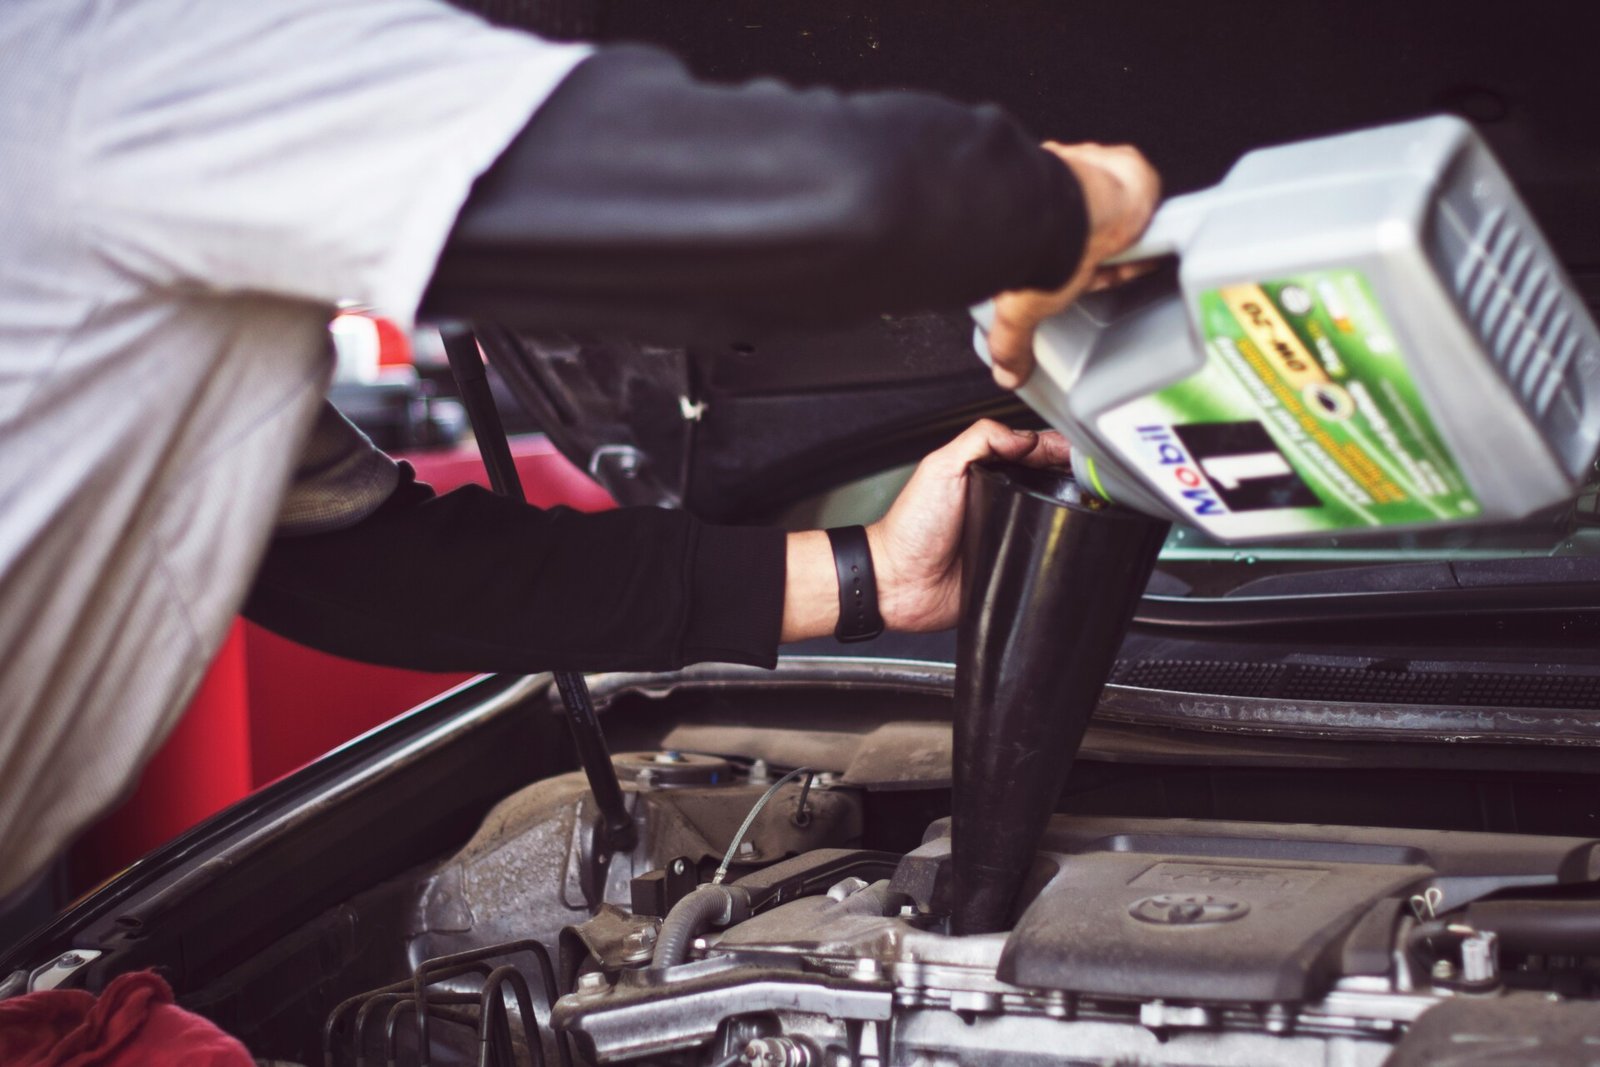 The Ultimate Guide to Car Maintenance